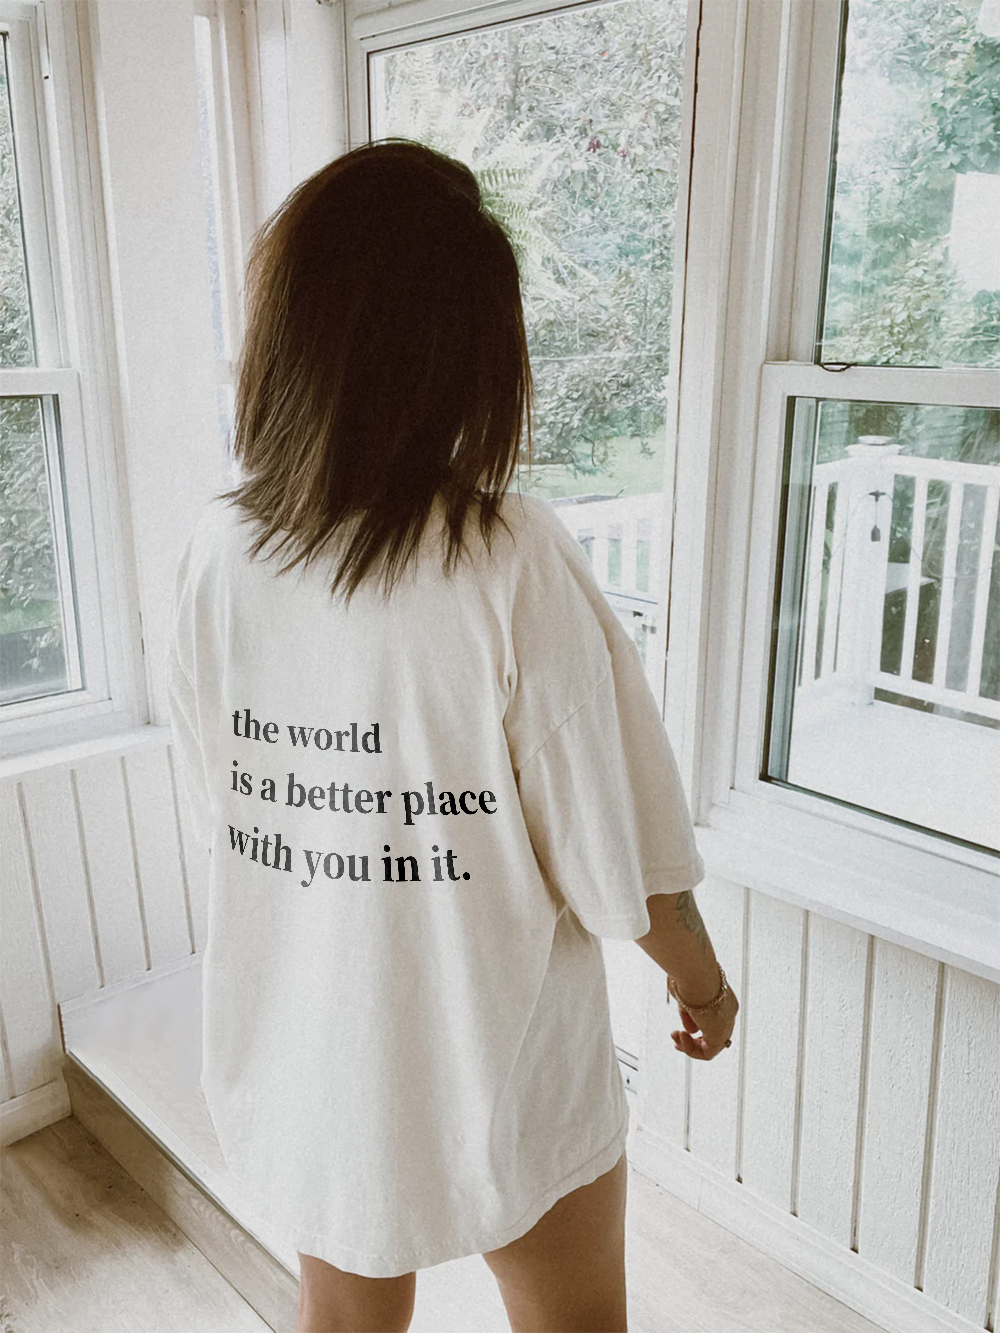 The world is a better place Printed Women's Oversized T-shirt